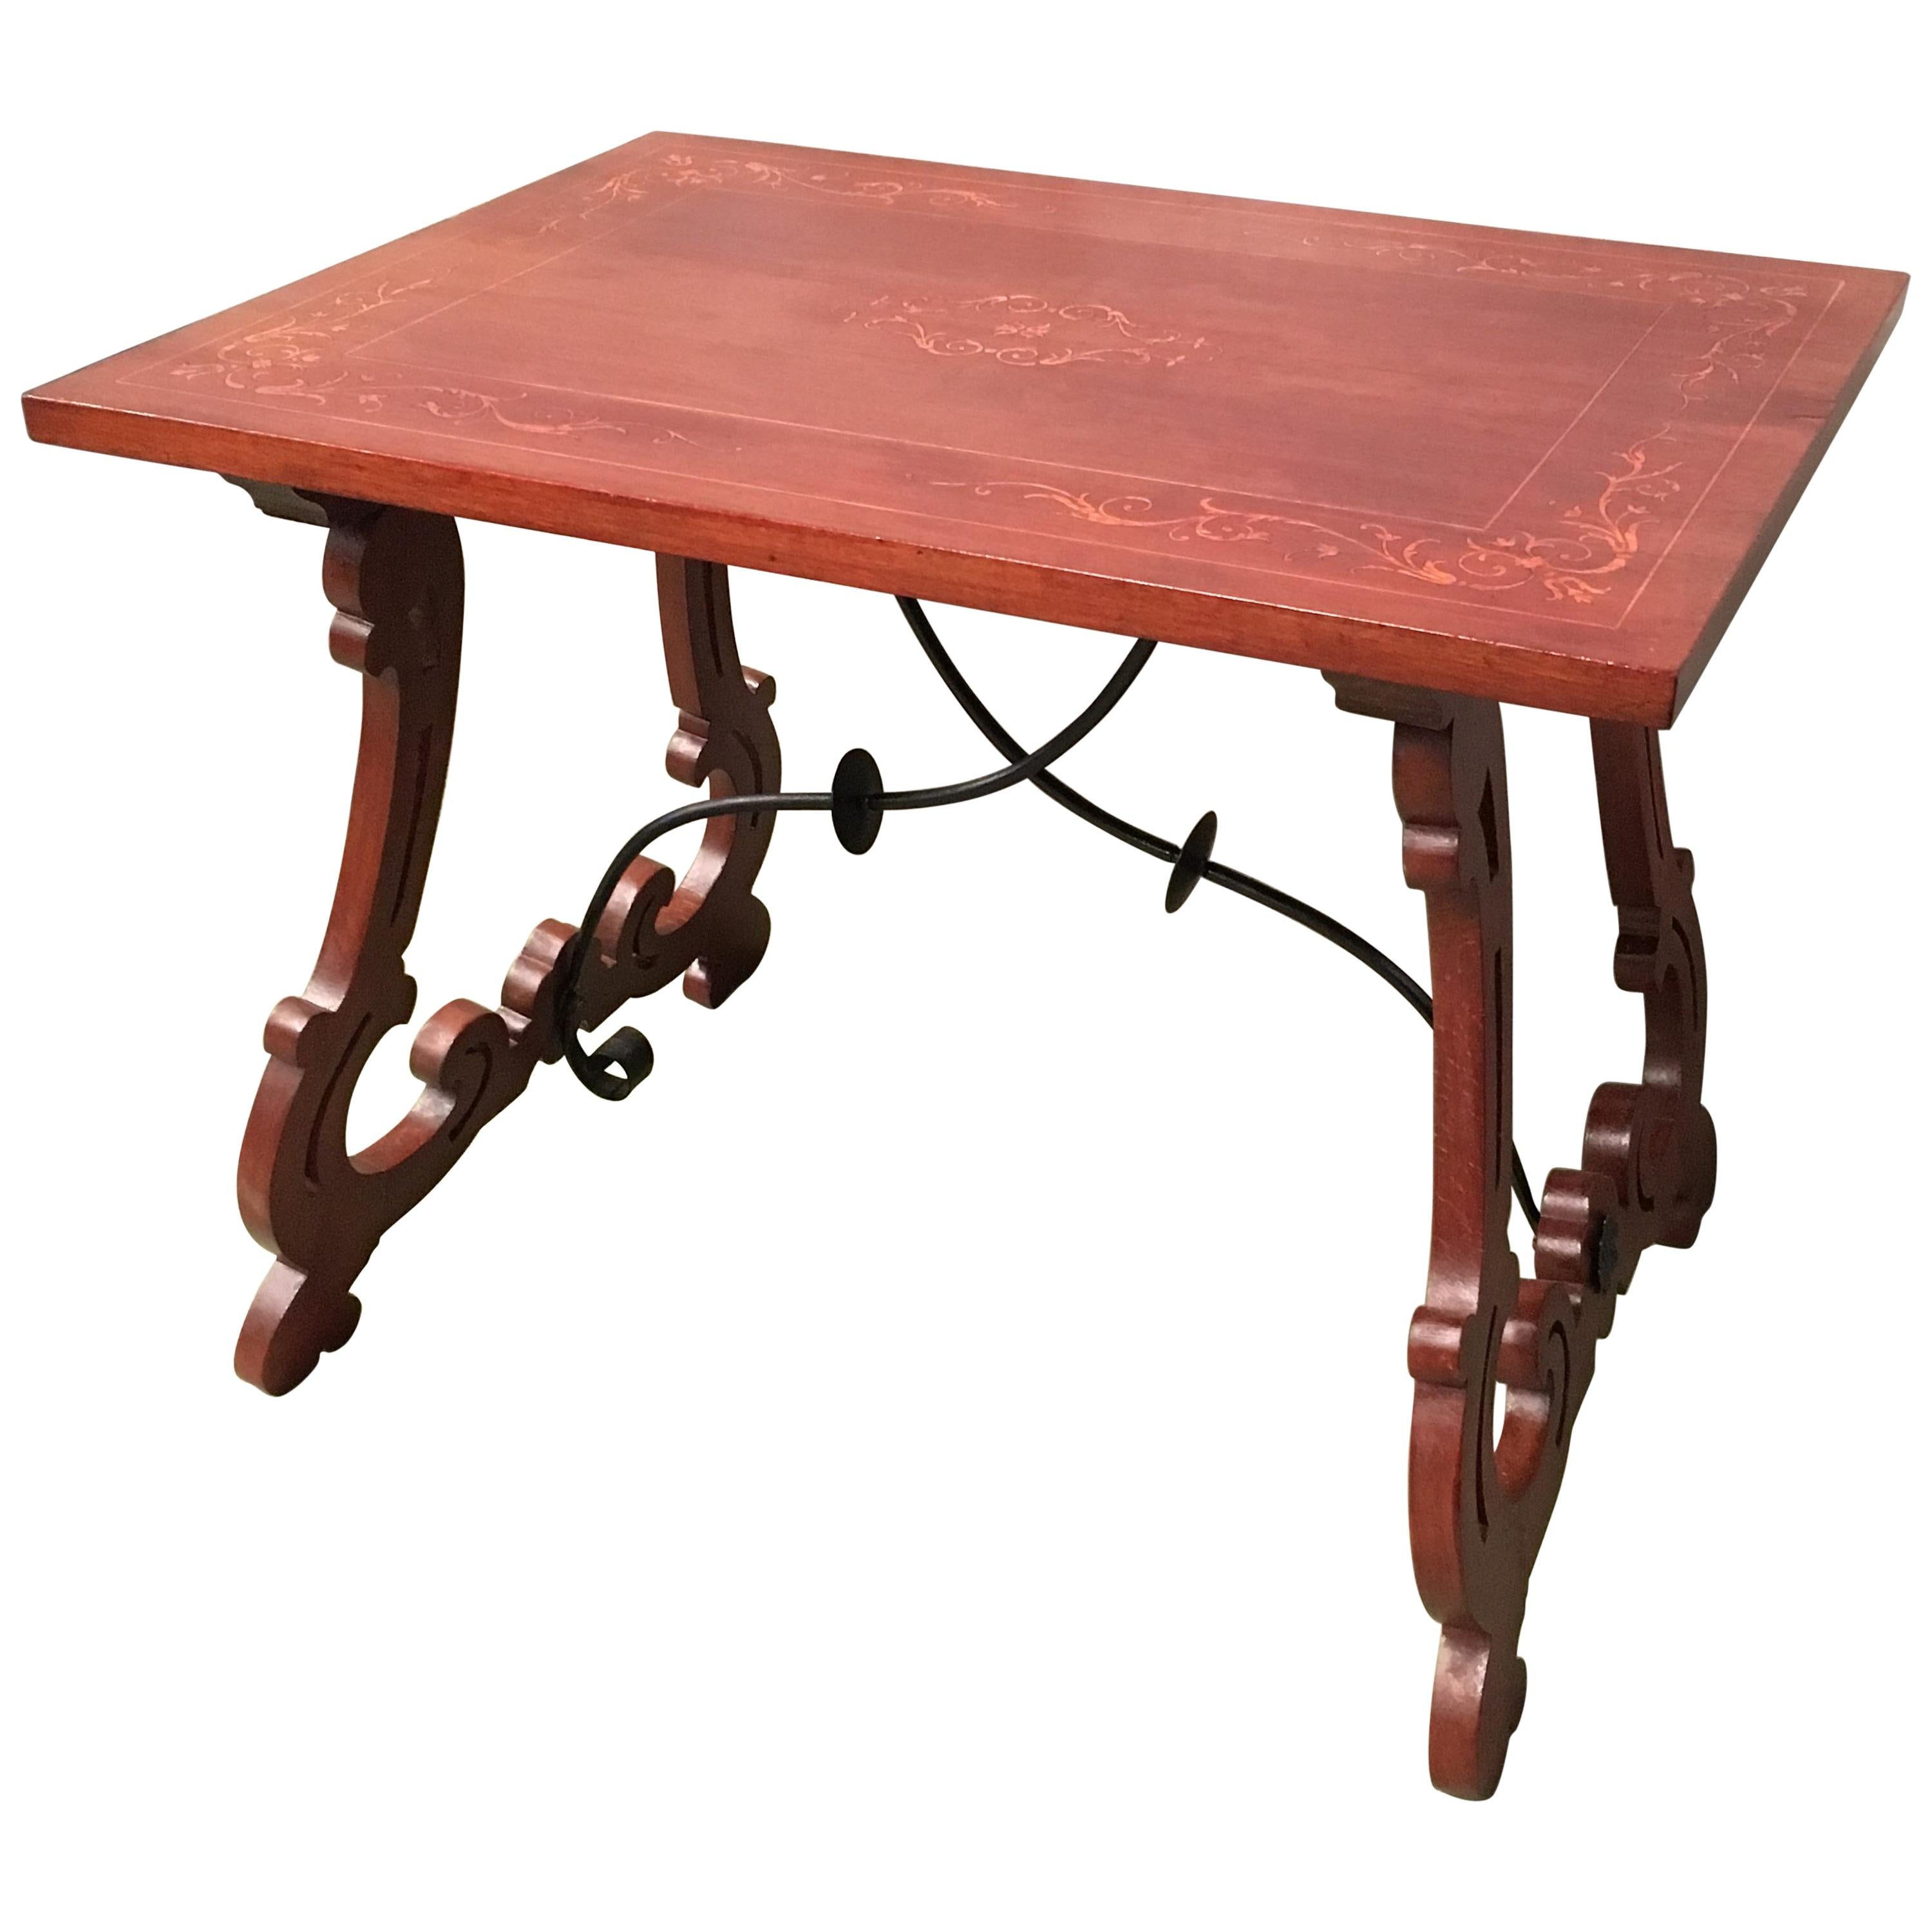 19th Century Baroque Spanish Side Table with Marquetry Top & Lyre Legs